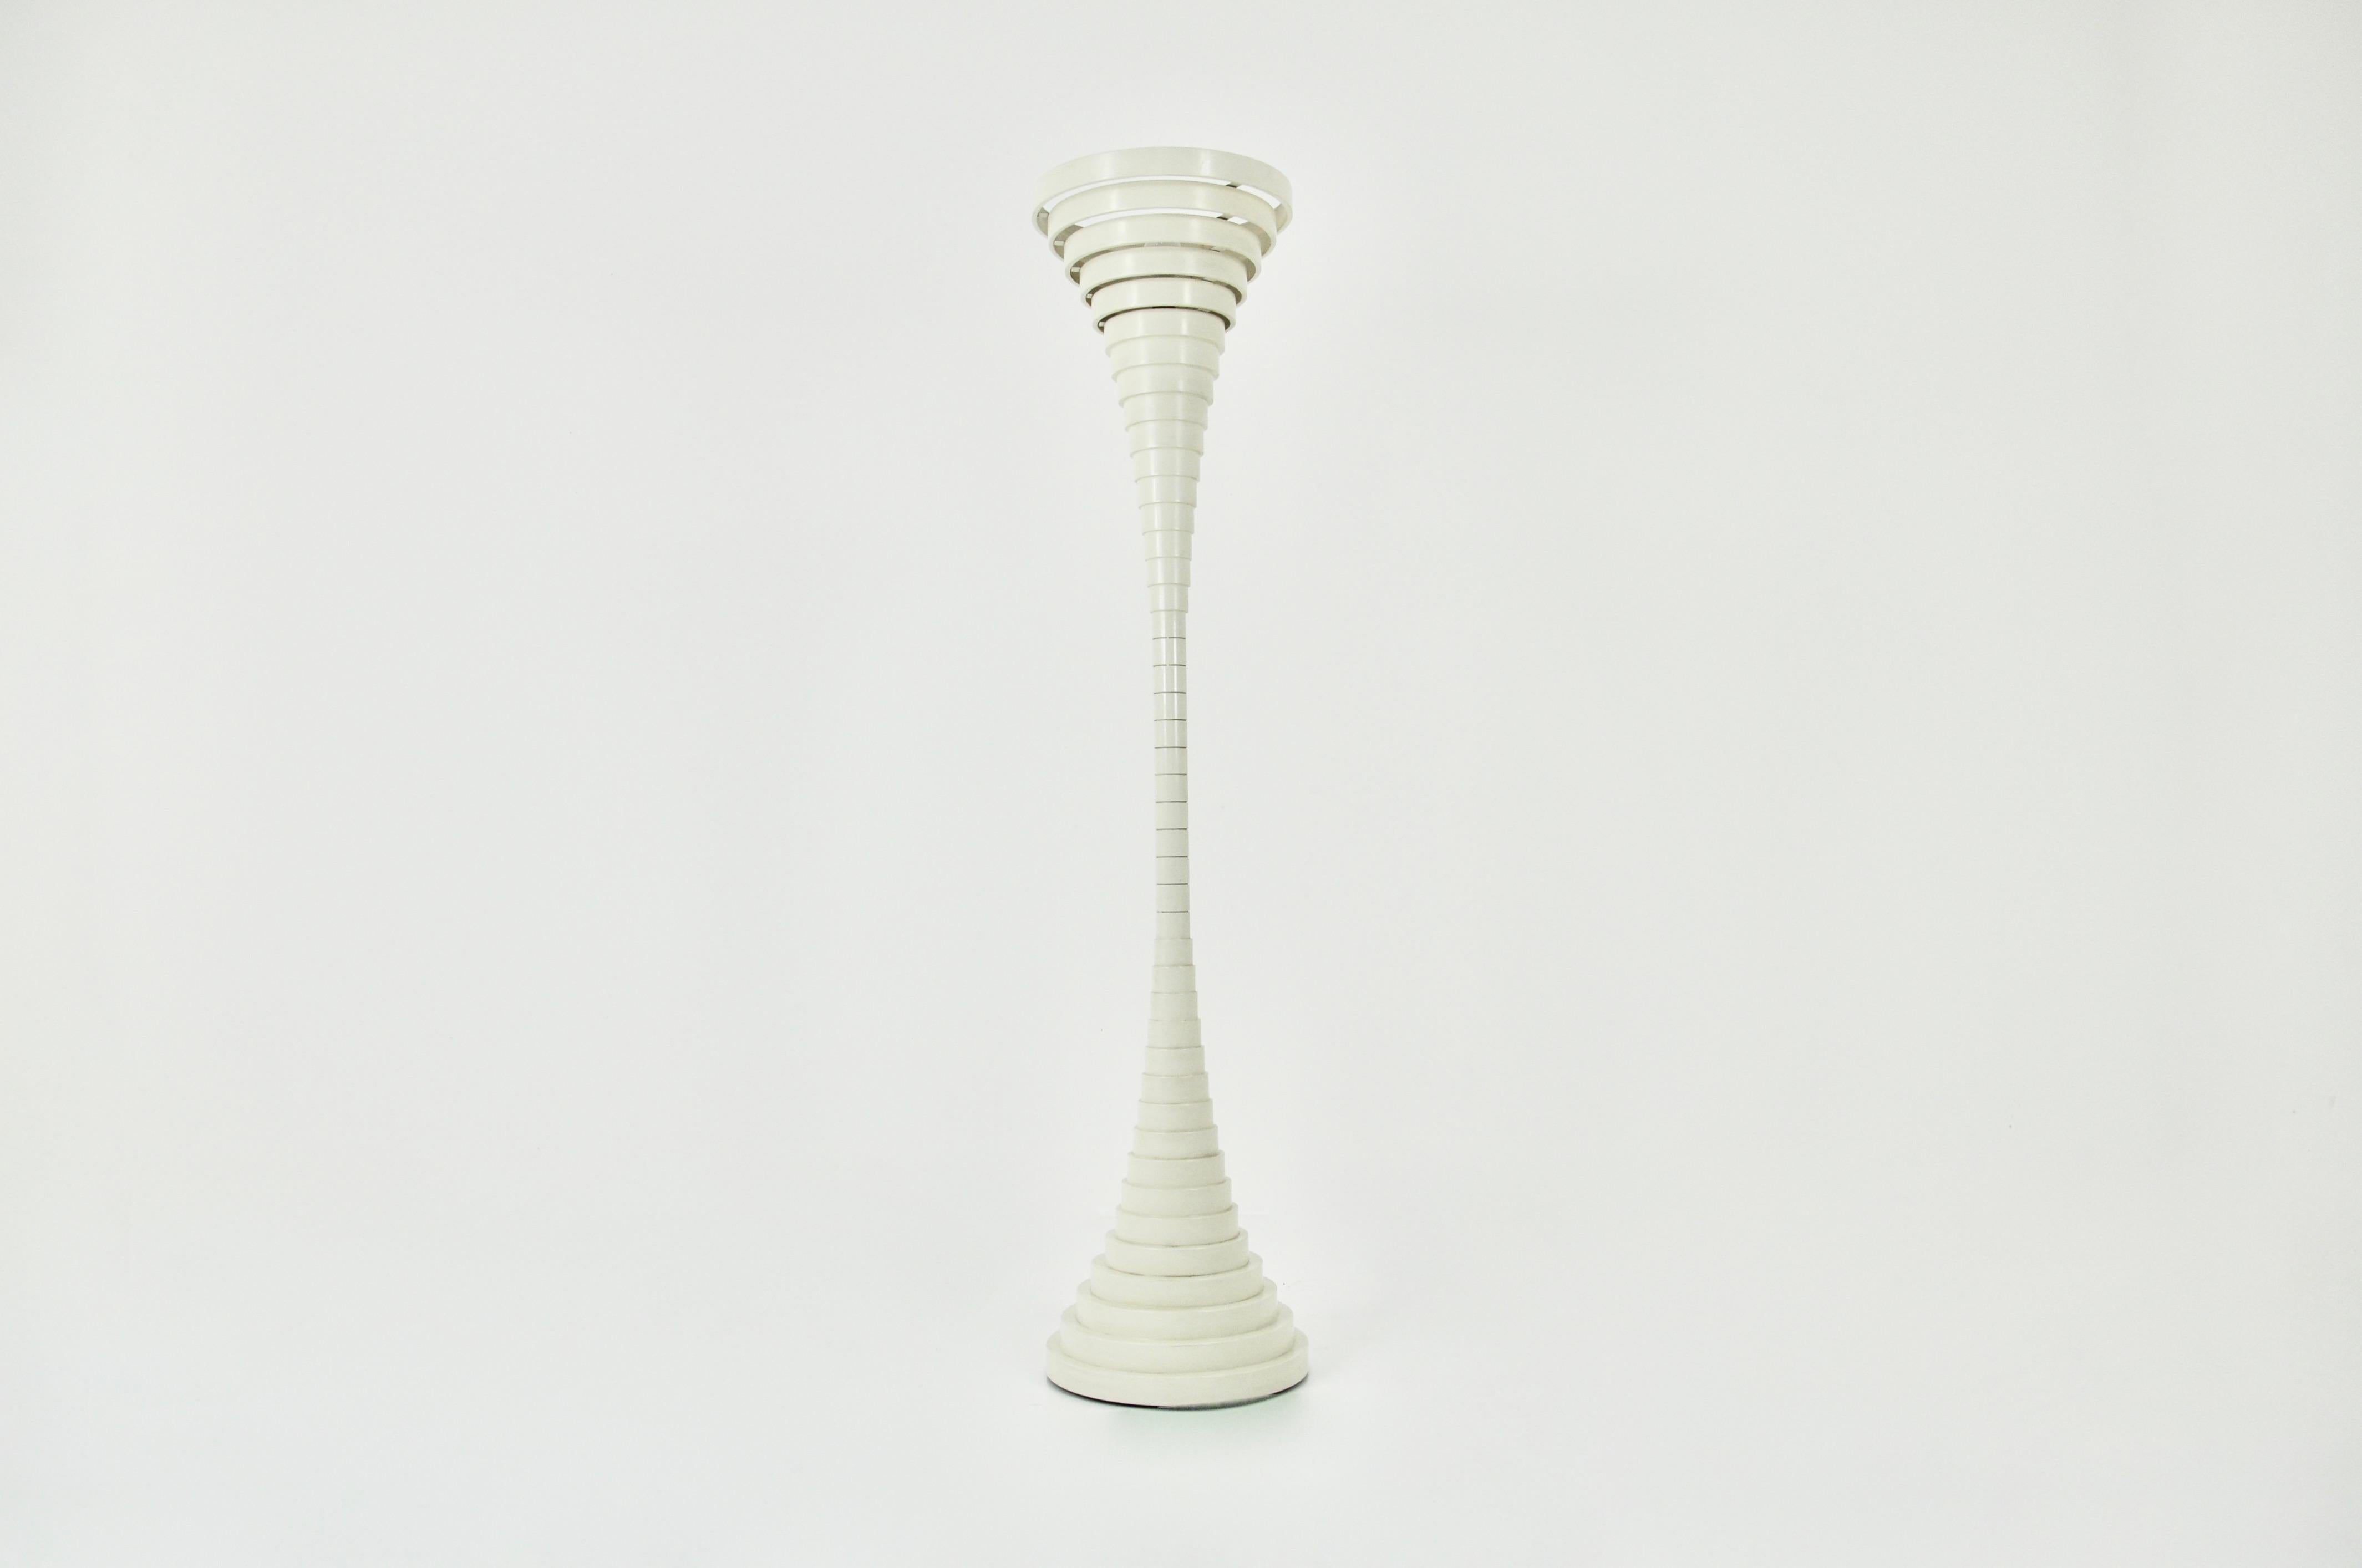 Creamy white wooden floor lamp by Silvio Bilancione. Wear due to age and age of the floor lamp.